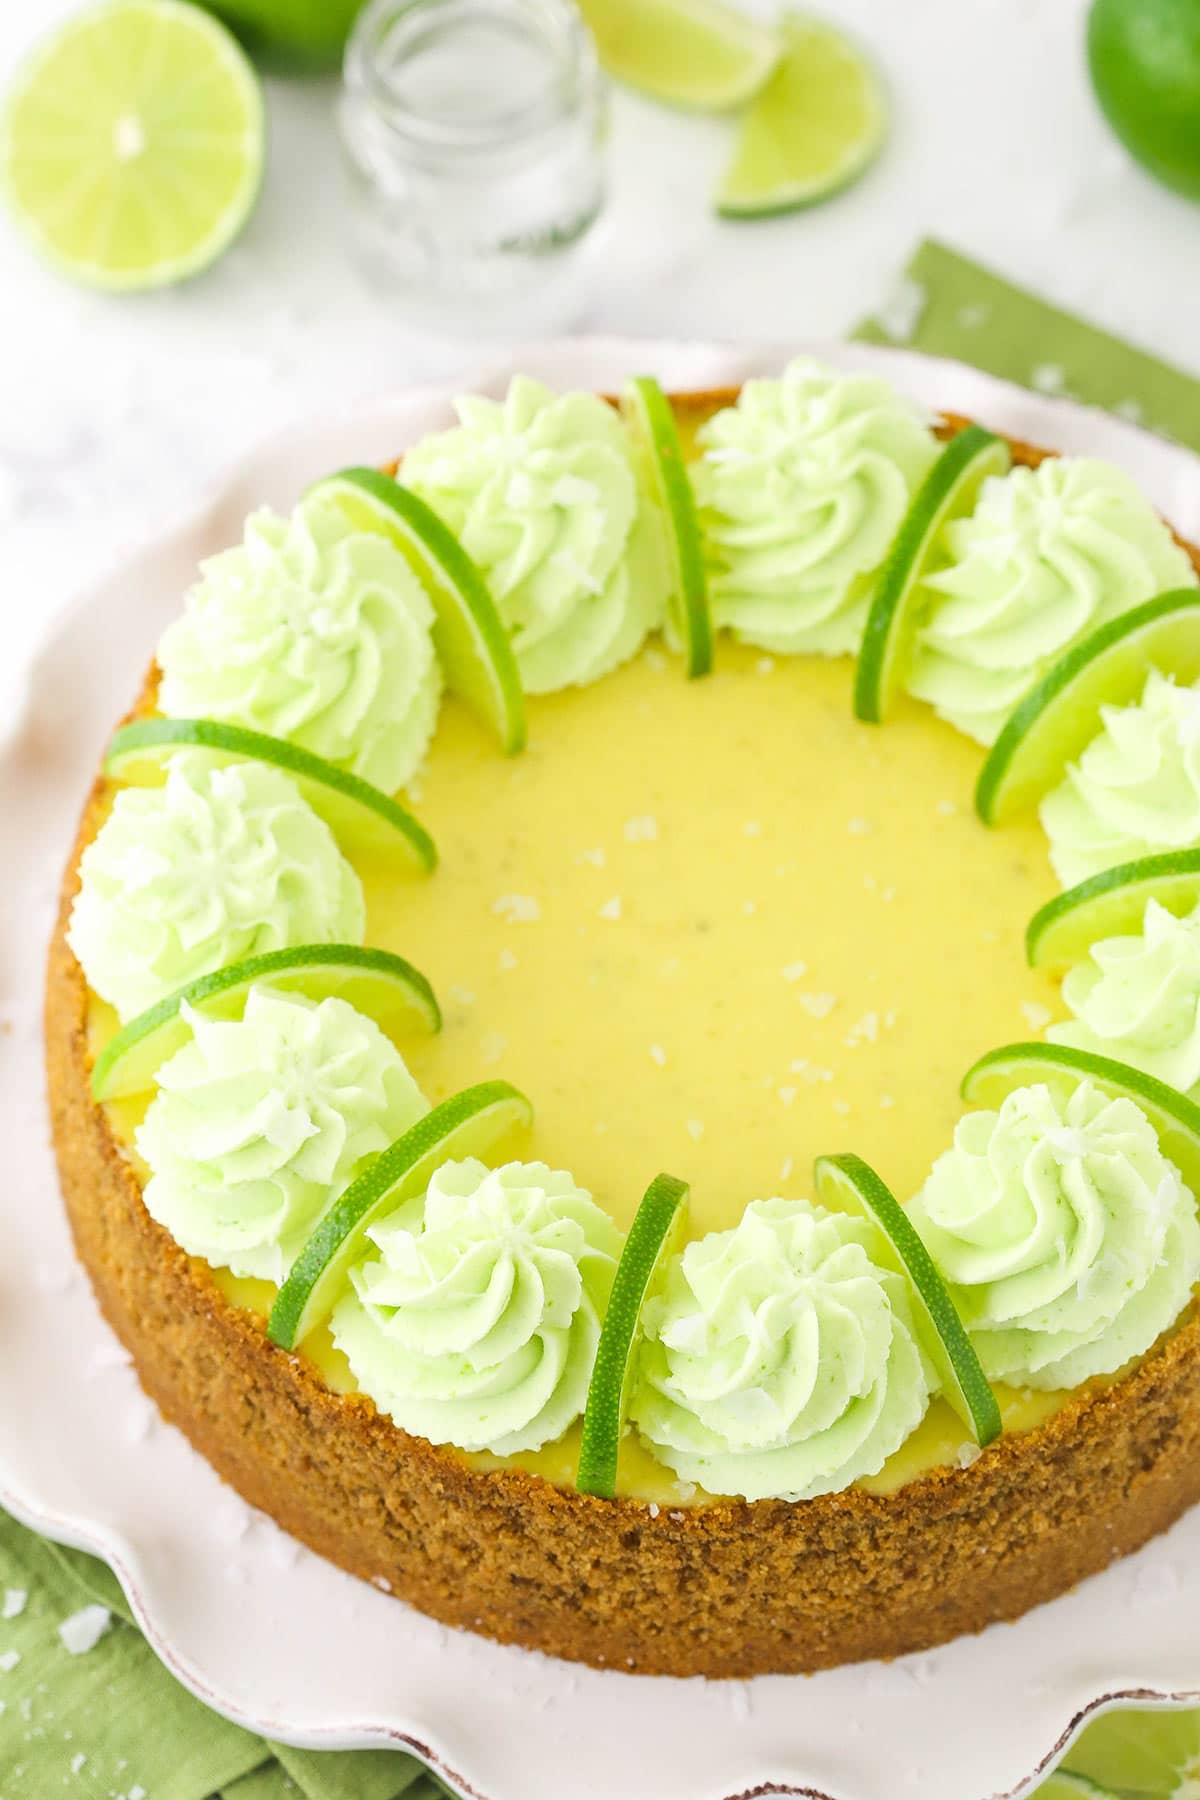 A whole margarita cheesecake on a white cake stand with a wavy rim